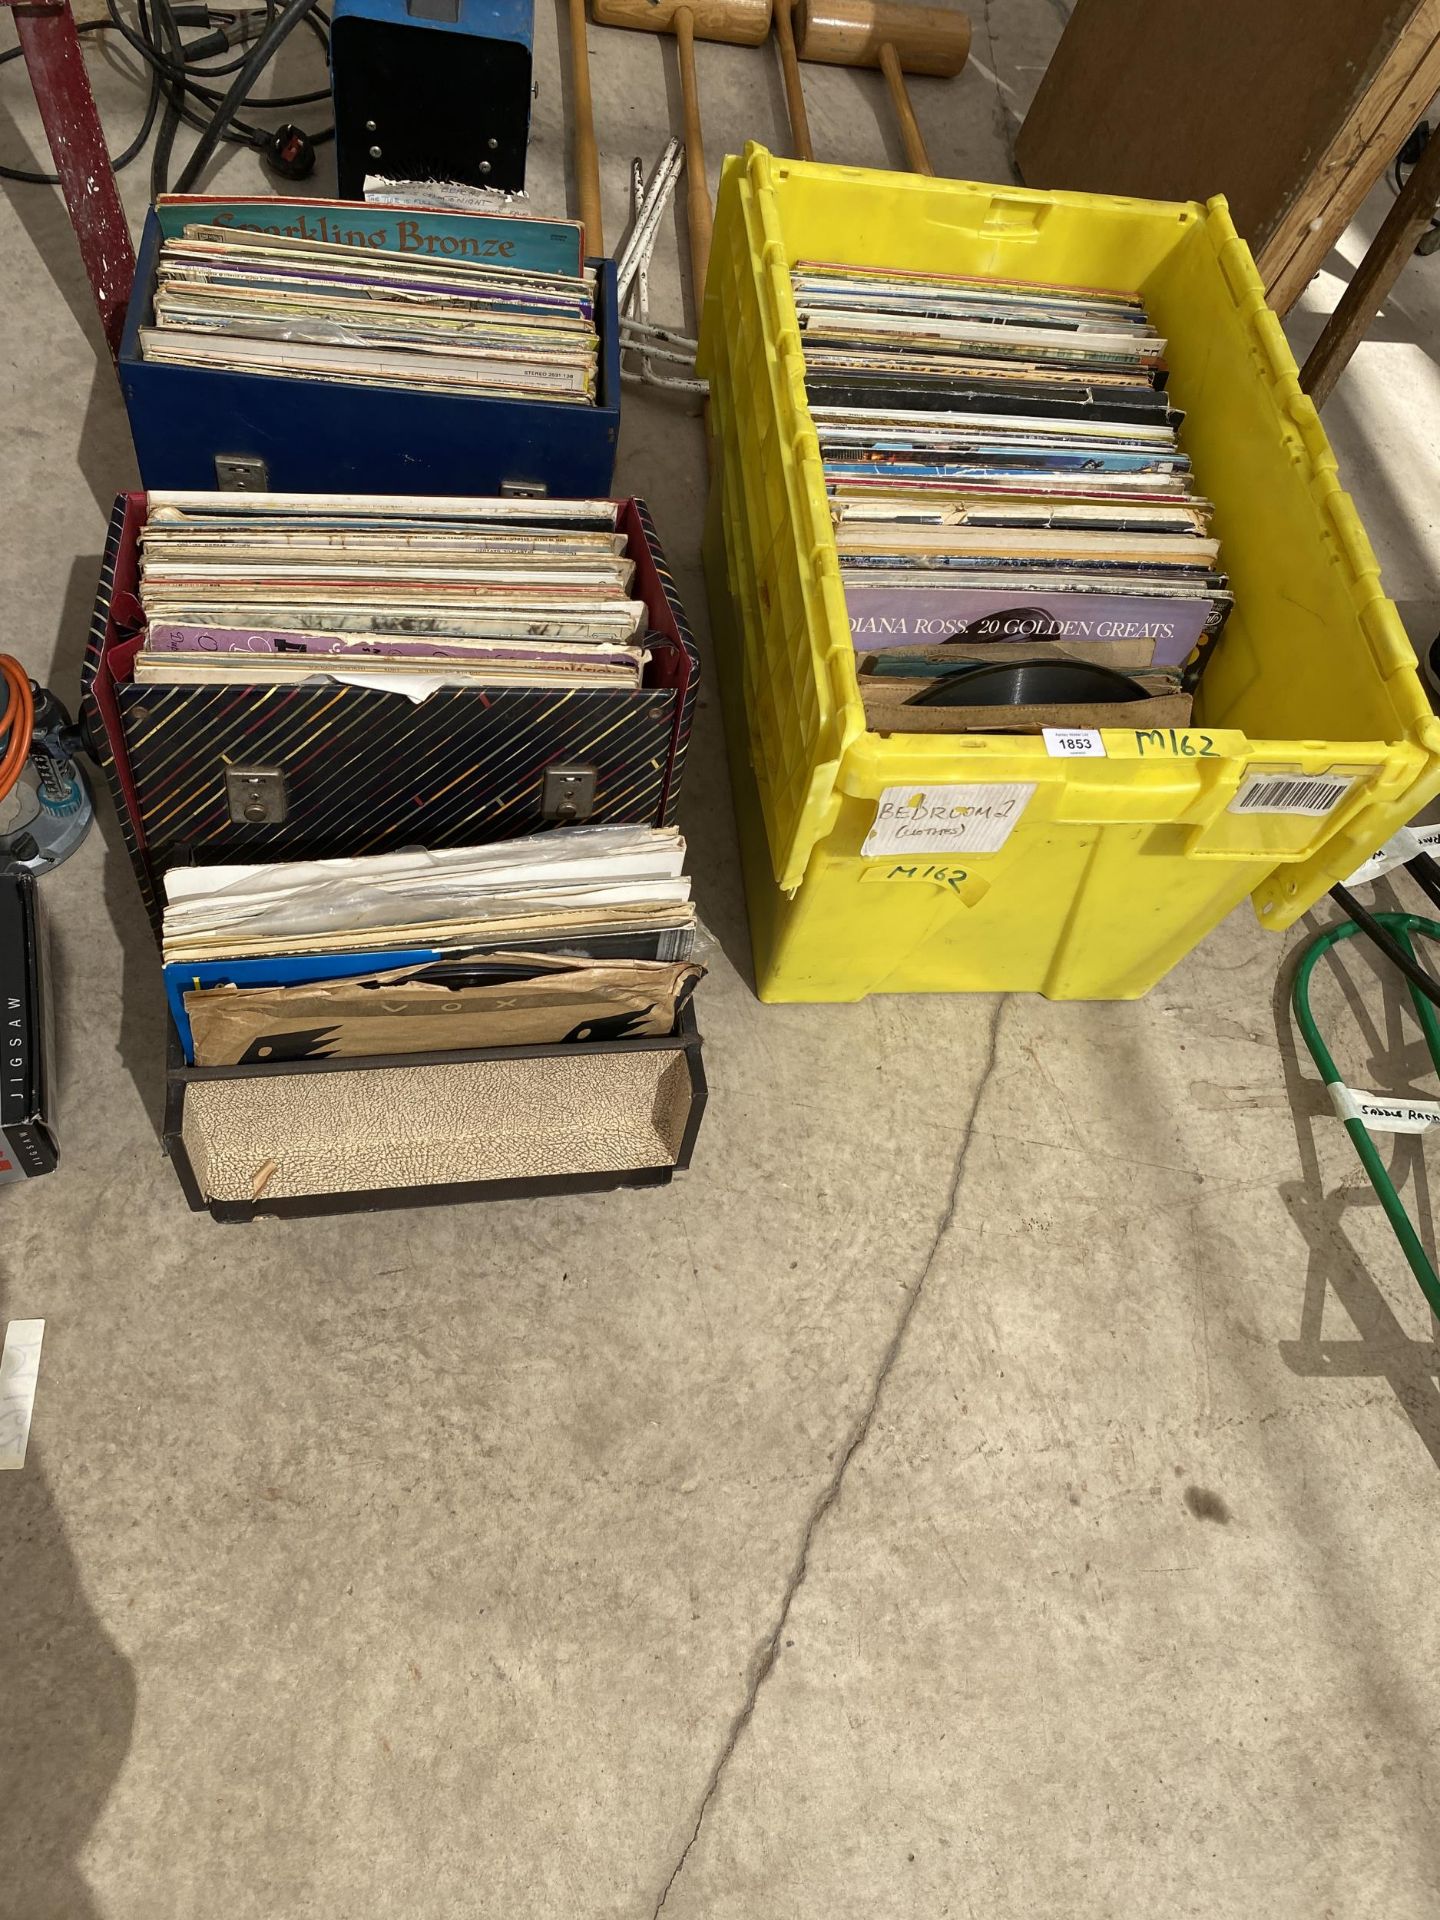 A LARGE COLLECTION OF LP RECORDS, STORAGE CASES ETC